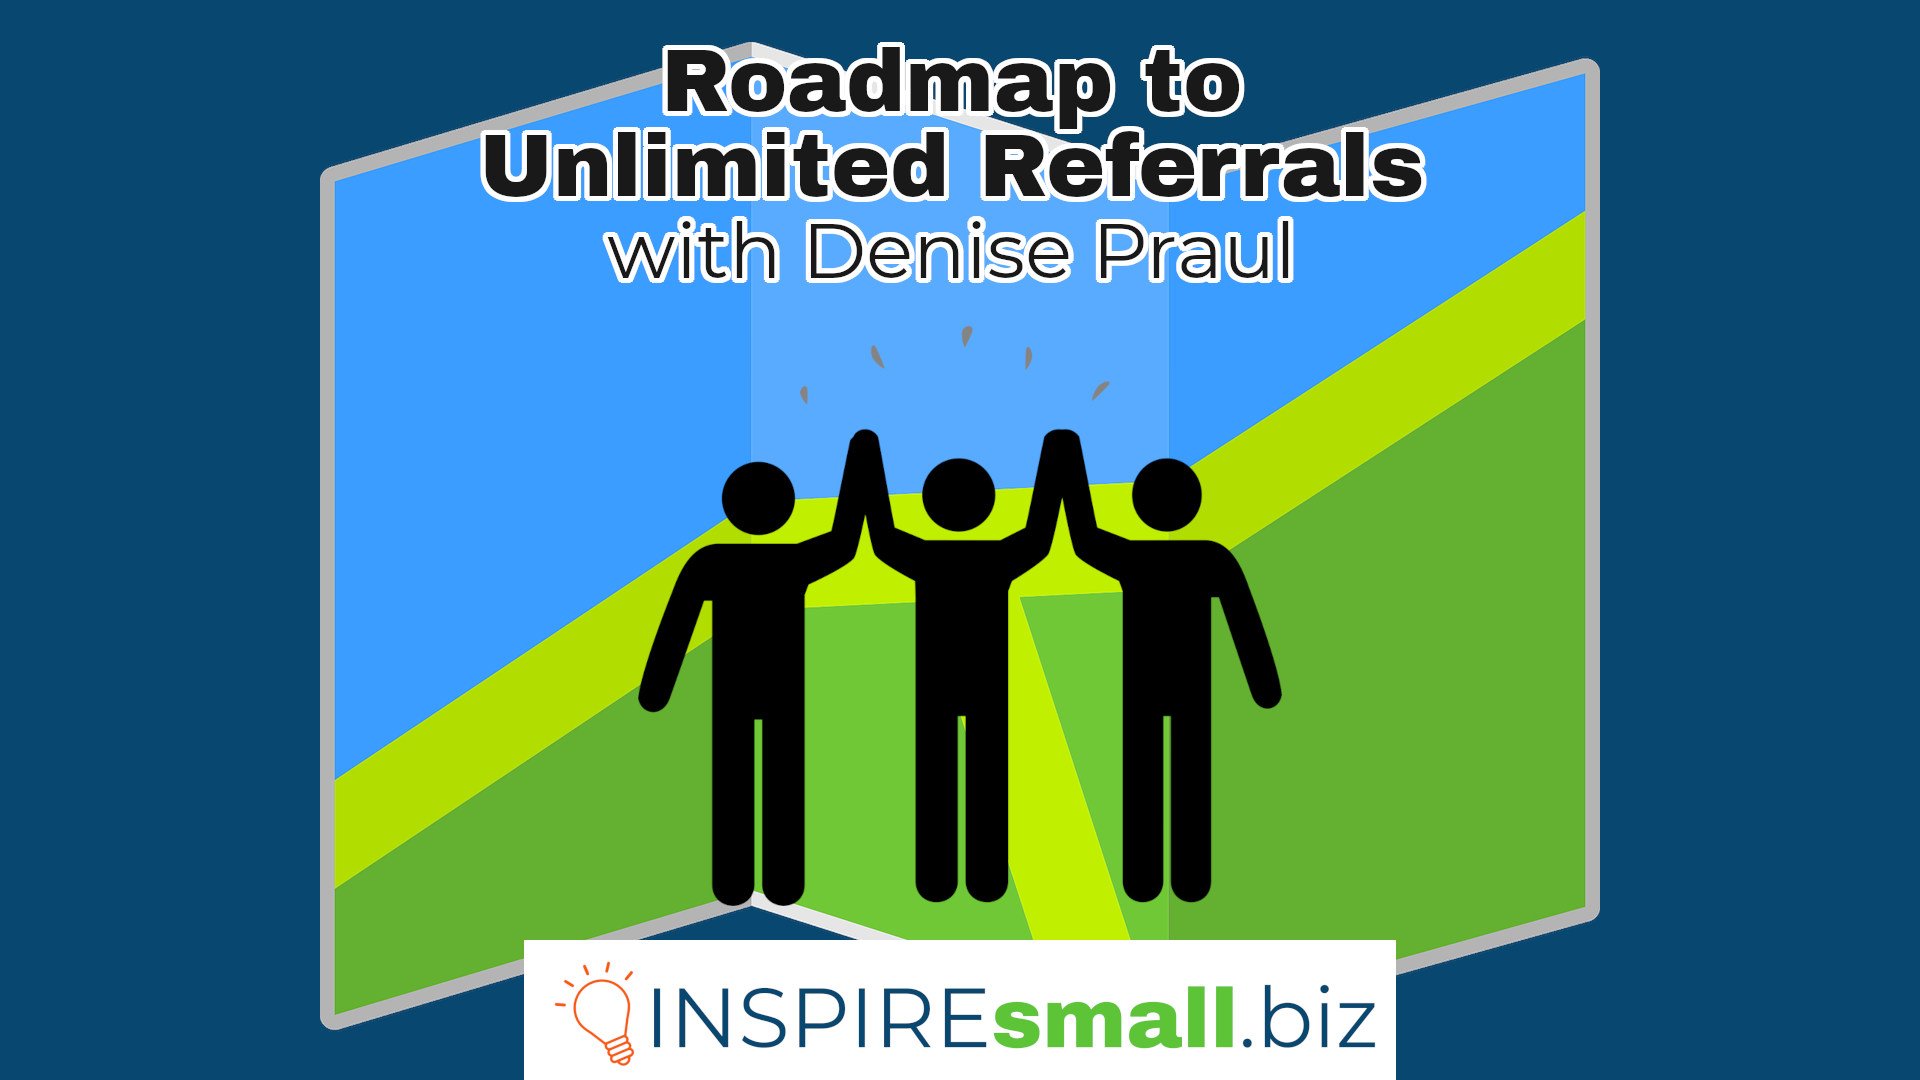 Roadmap to Unlimited Referrals with Denise Praul, hosted by INSPIREsmall.biz